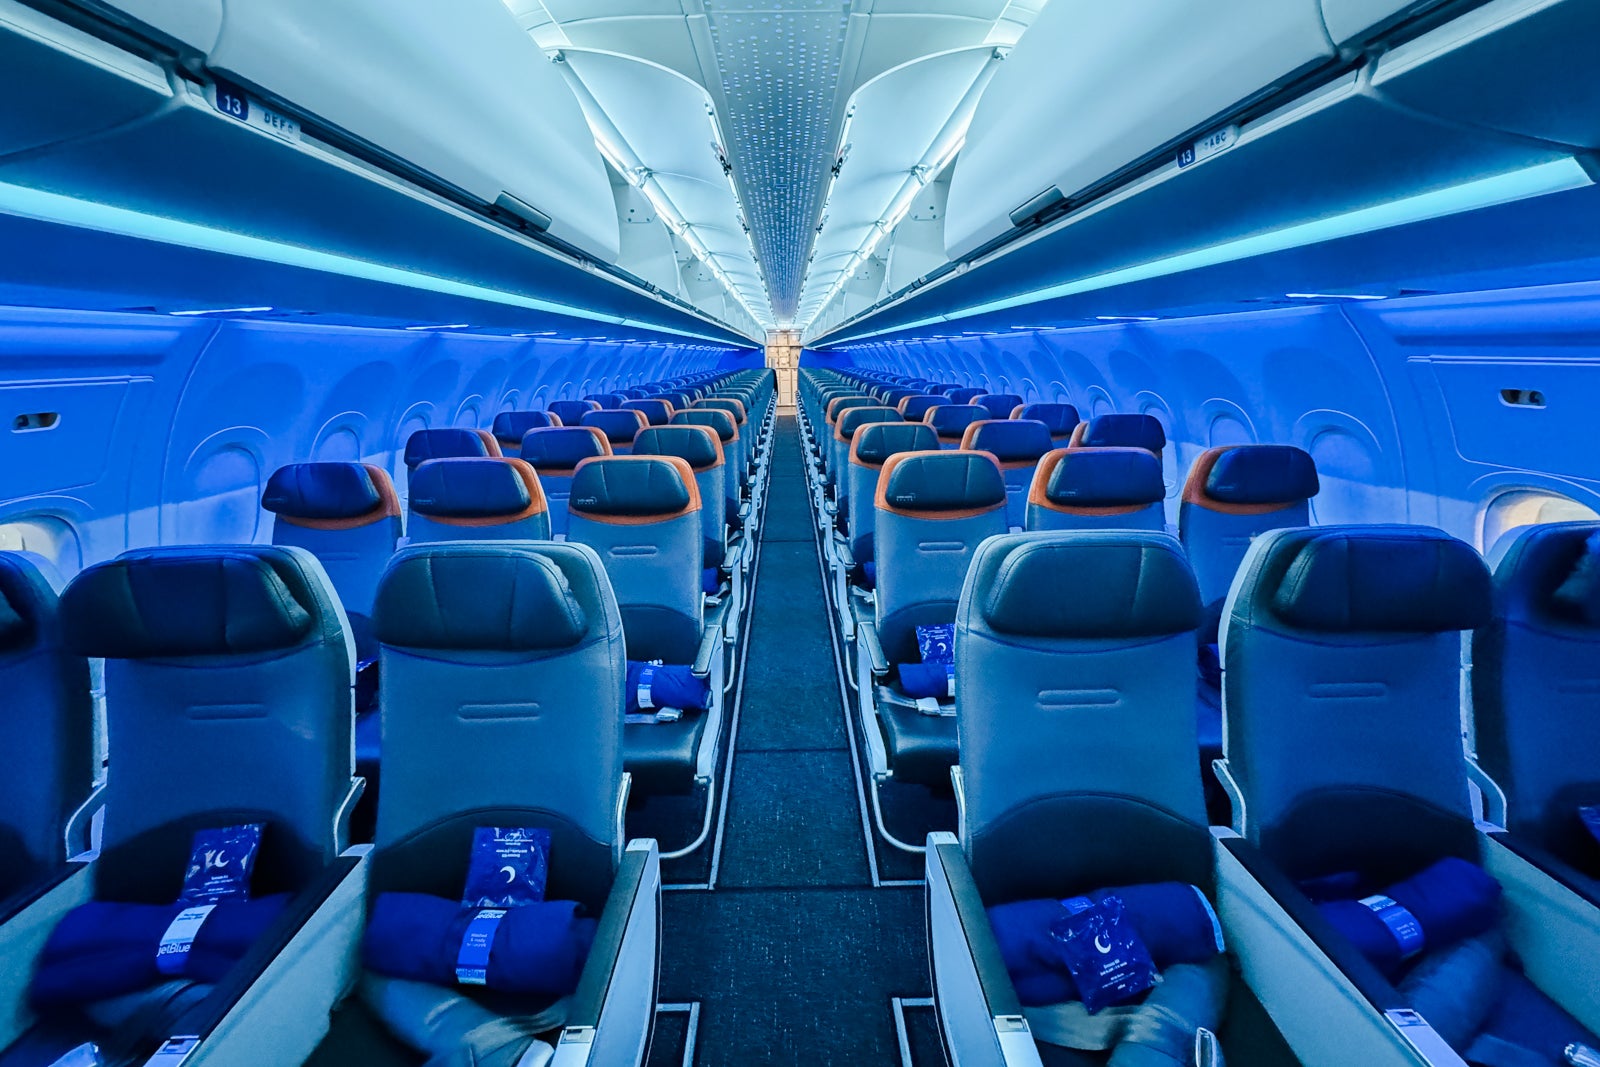 A review of JetBlue Even More Space on the Airbus A321LR from New York to London